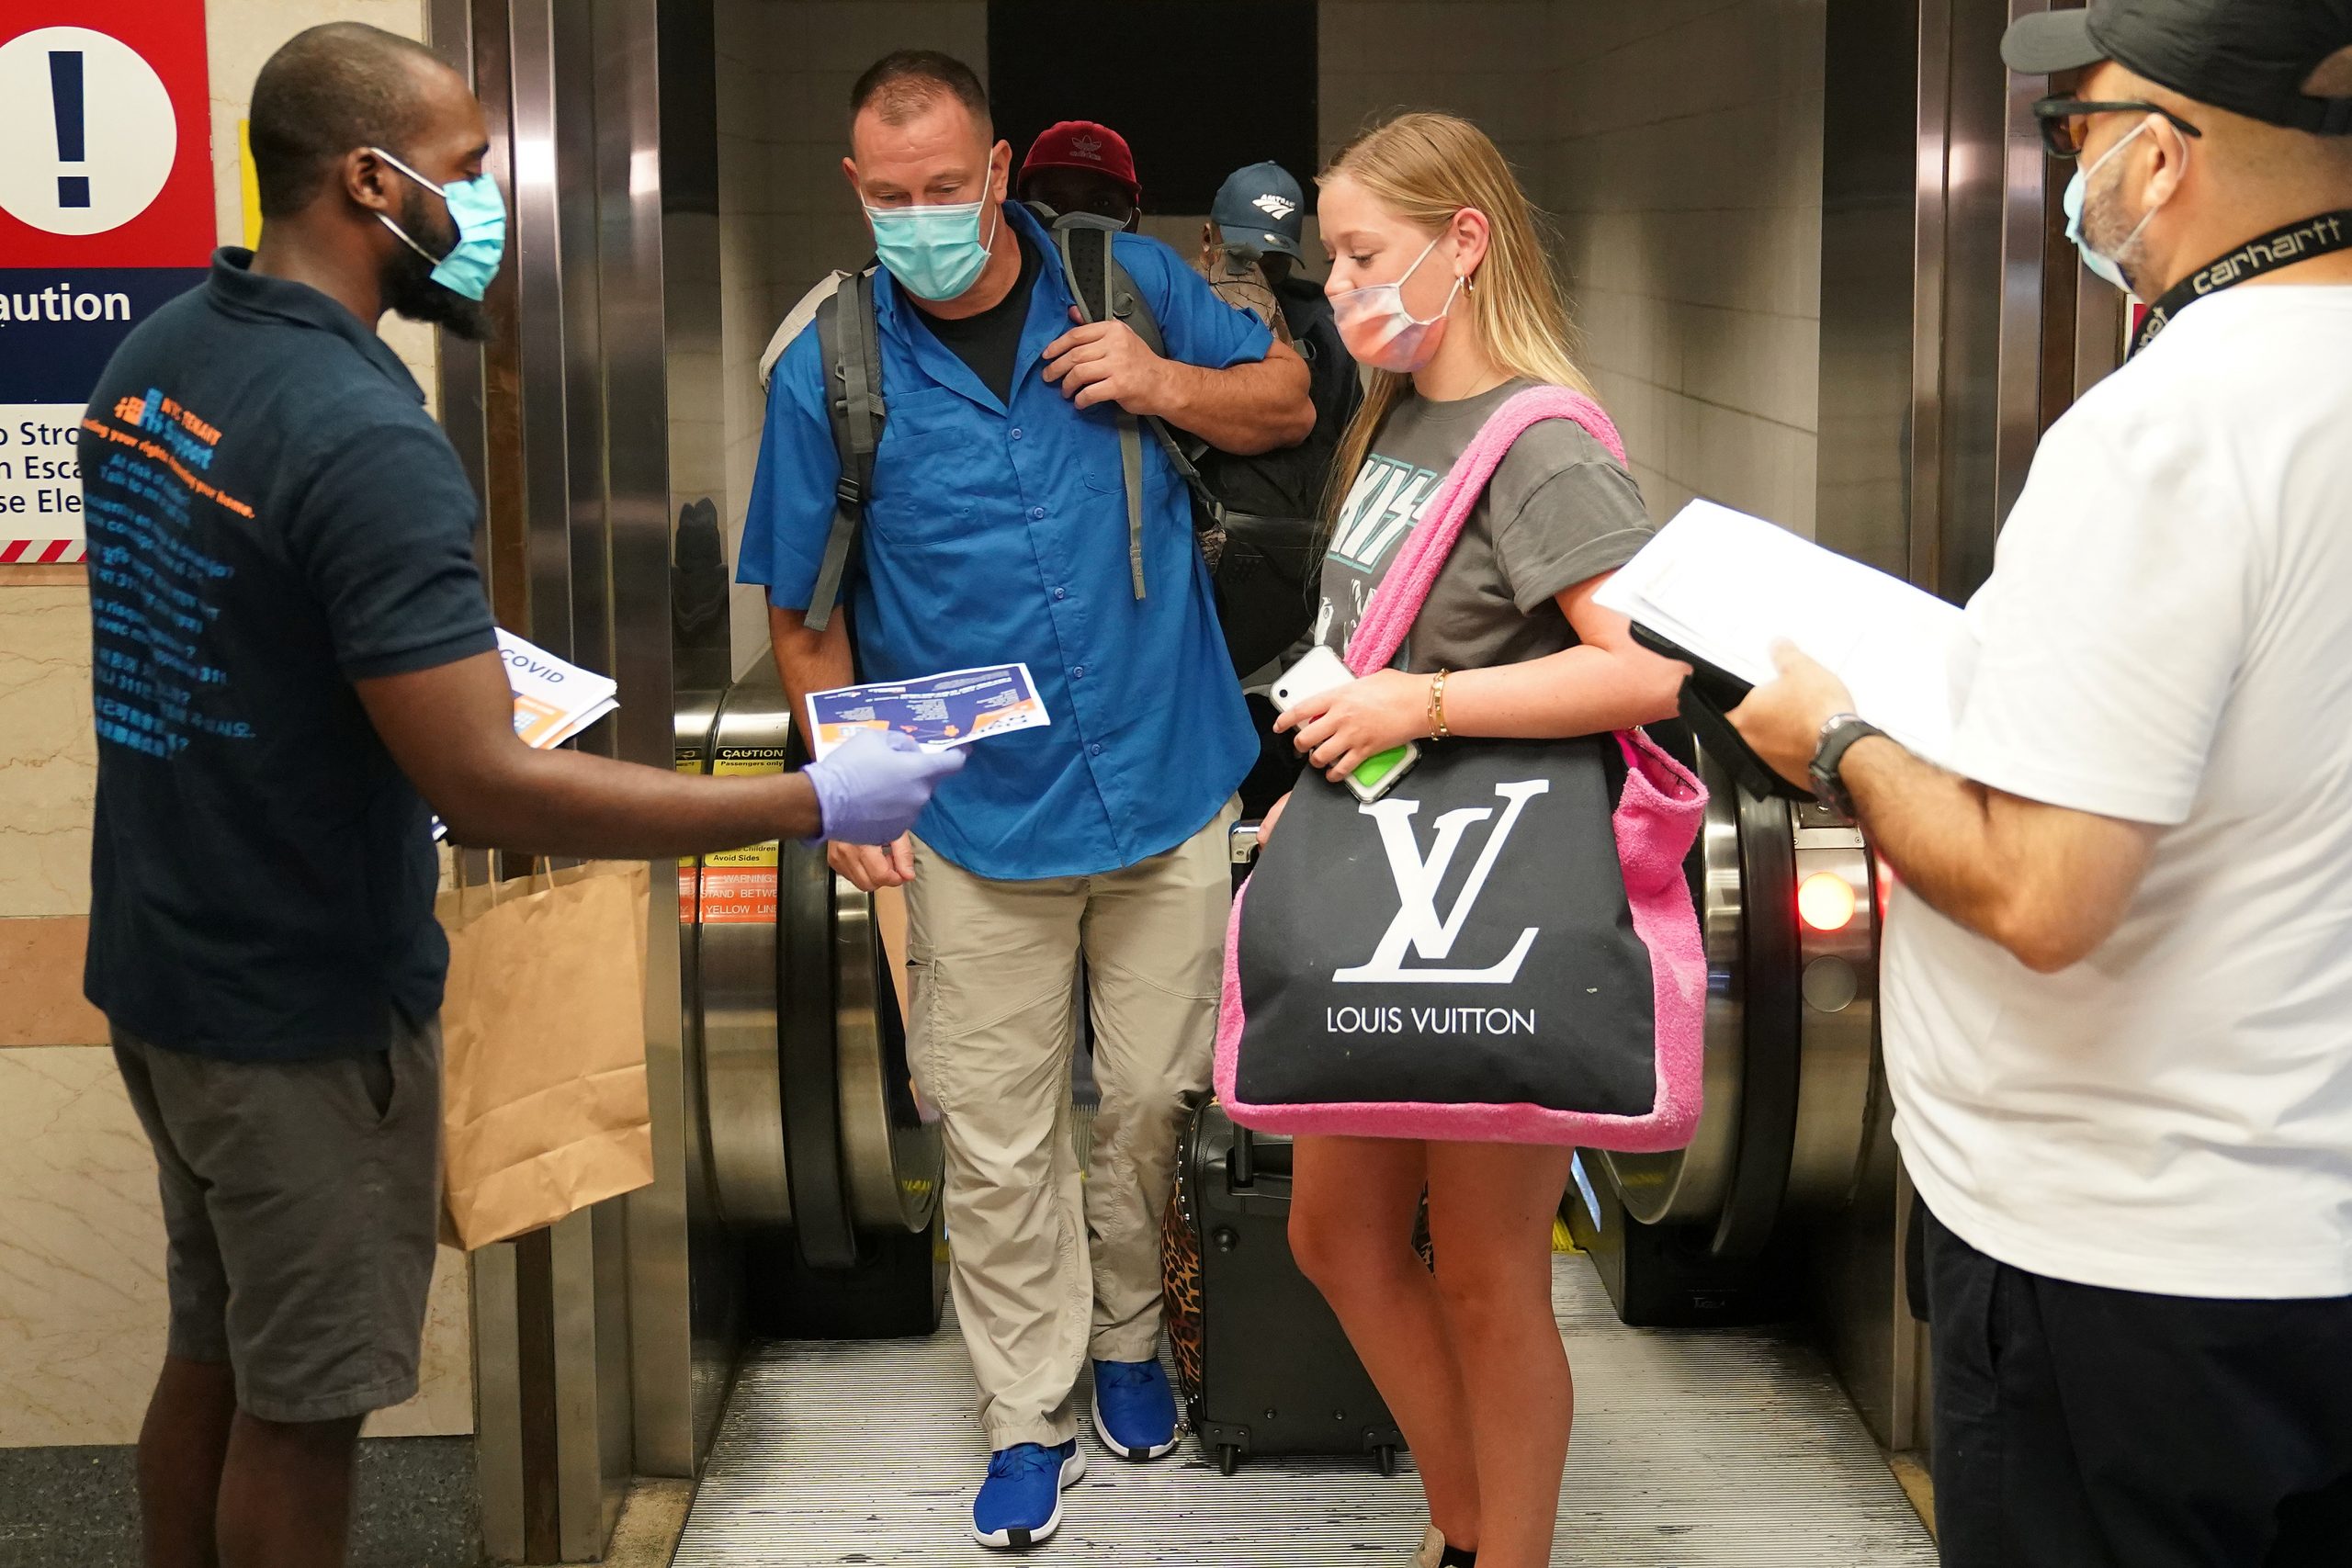 Quarantine 'Checkpoint' Opens at New York City's Penn Station to